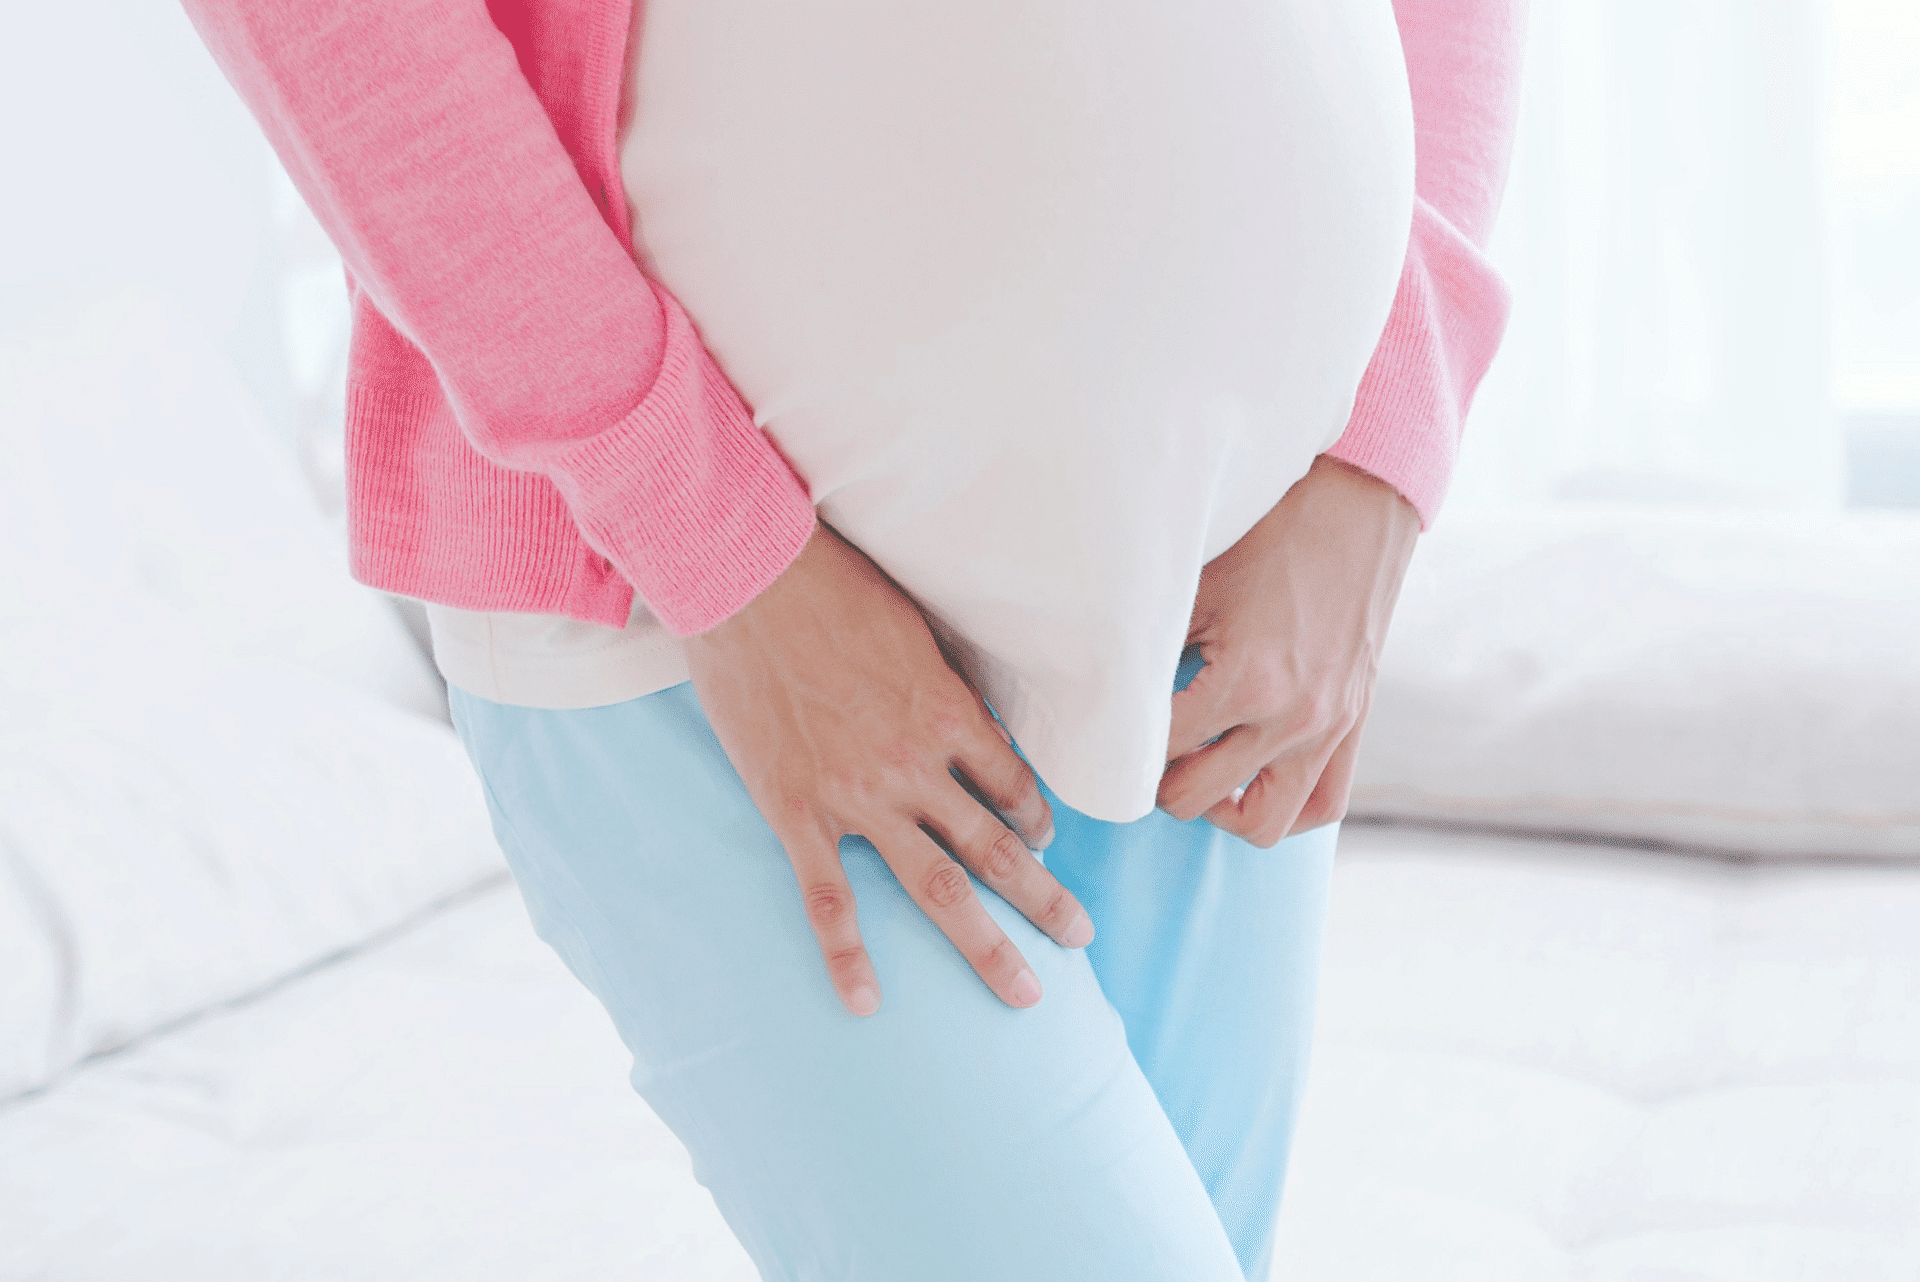 urinary incontinence in pregnancy